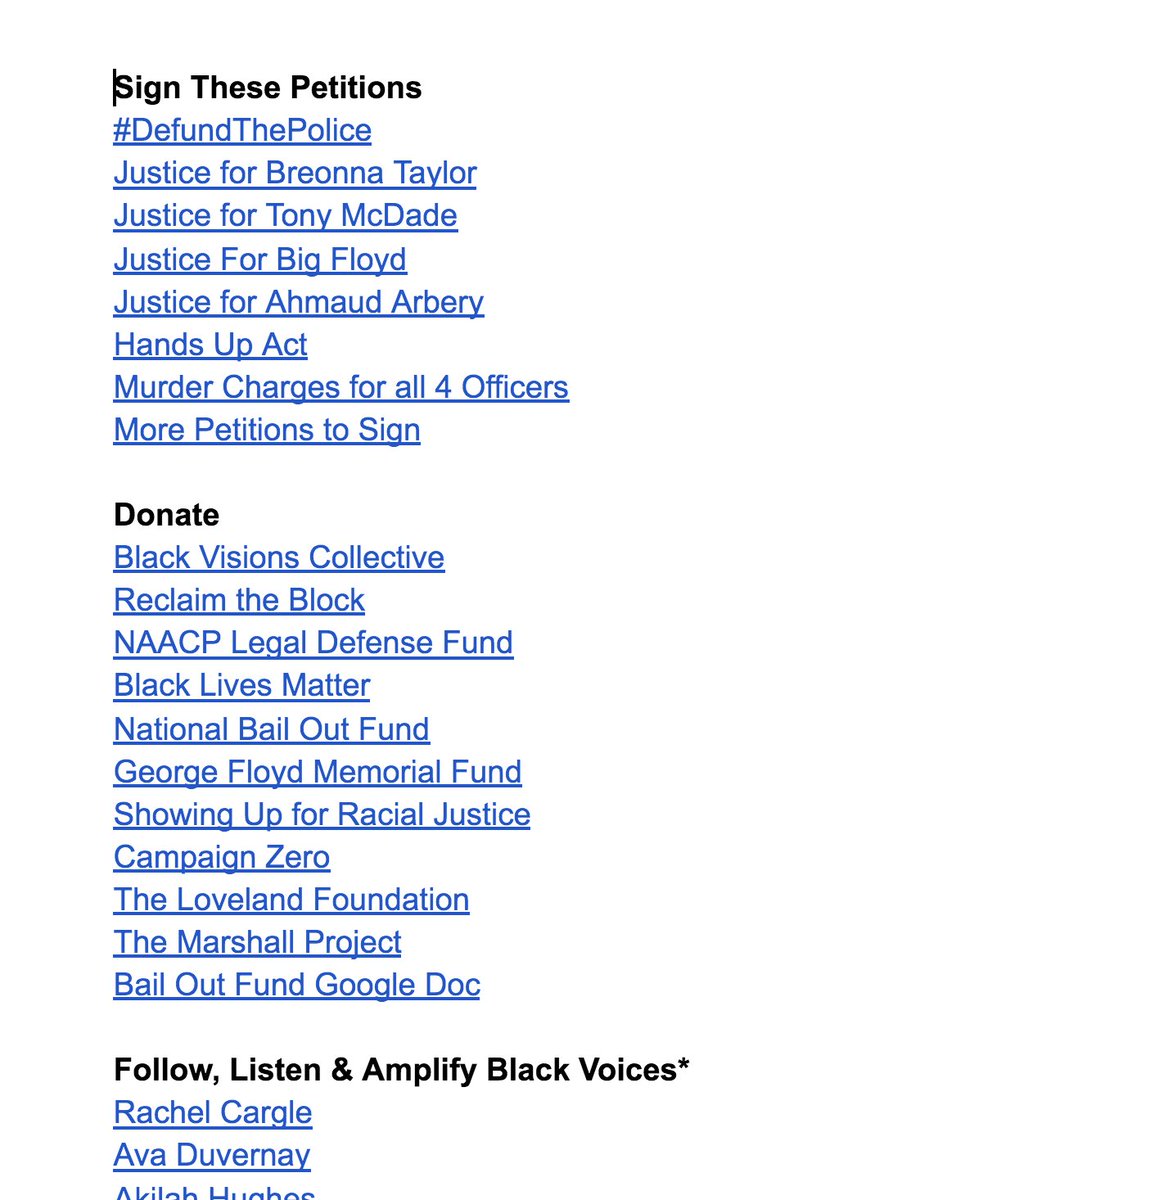 List of petitions to sign, places to donate, resources on anti-racism, Black activists & artists to follow, etc. docs.google.com/document/d/1zh…